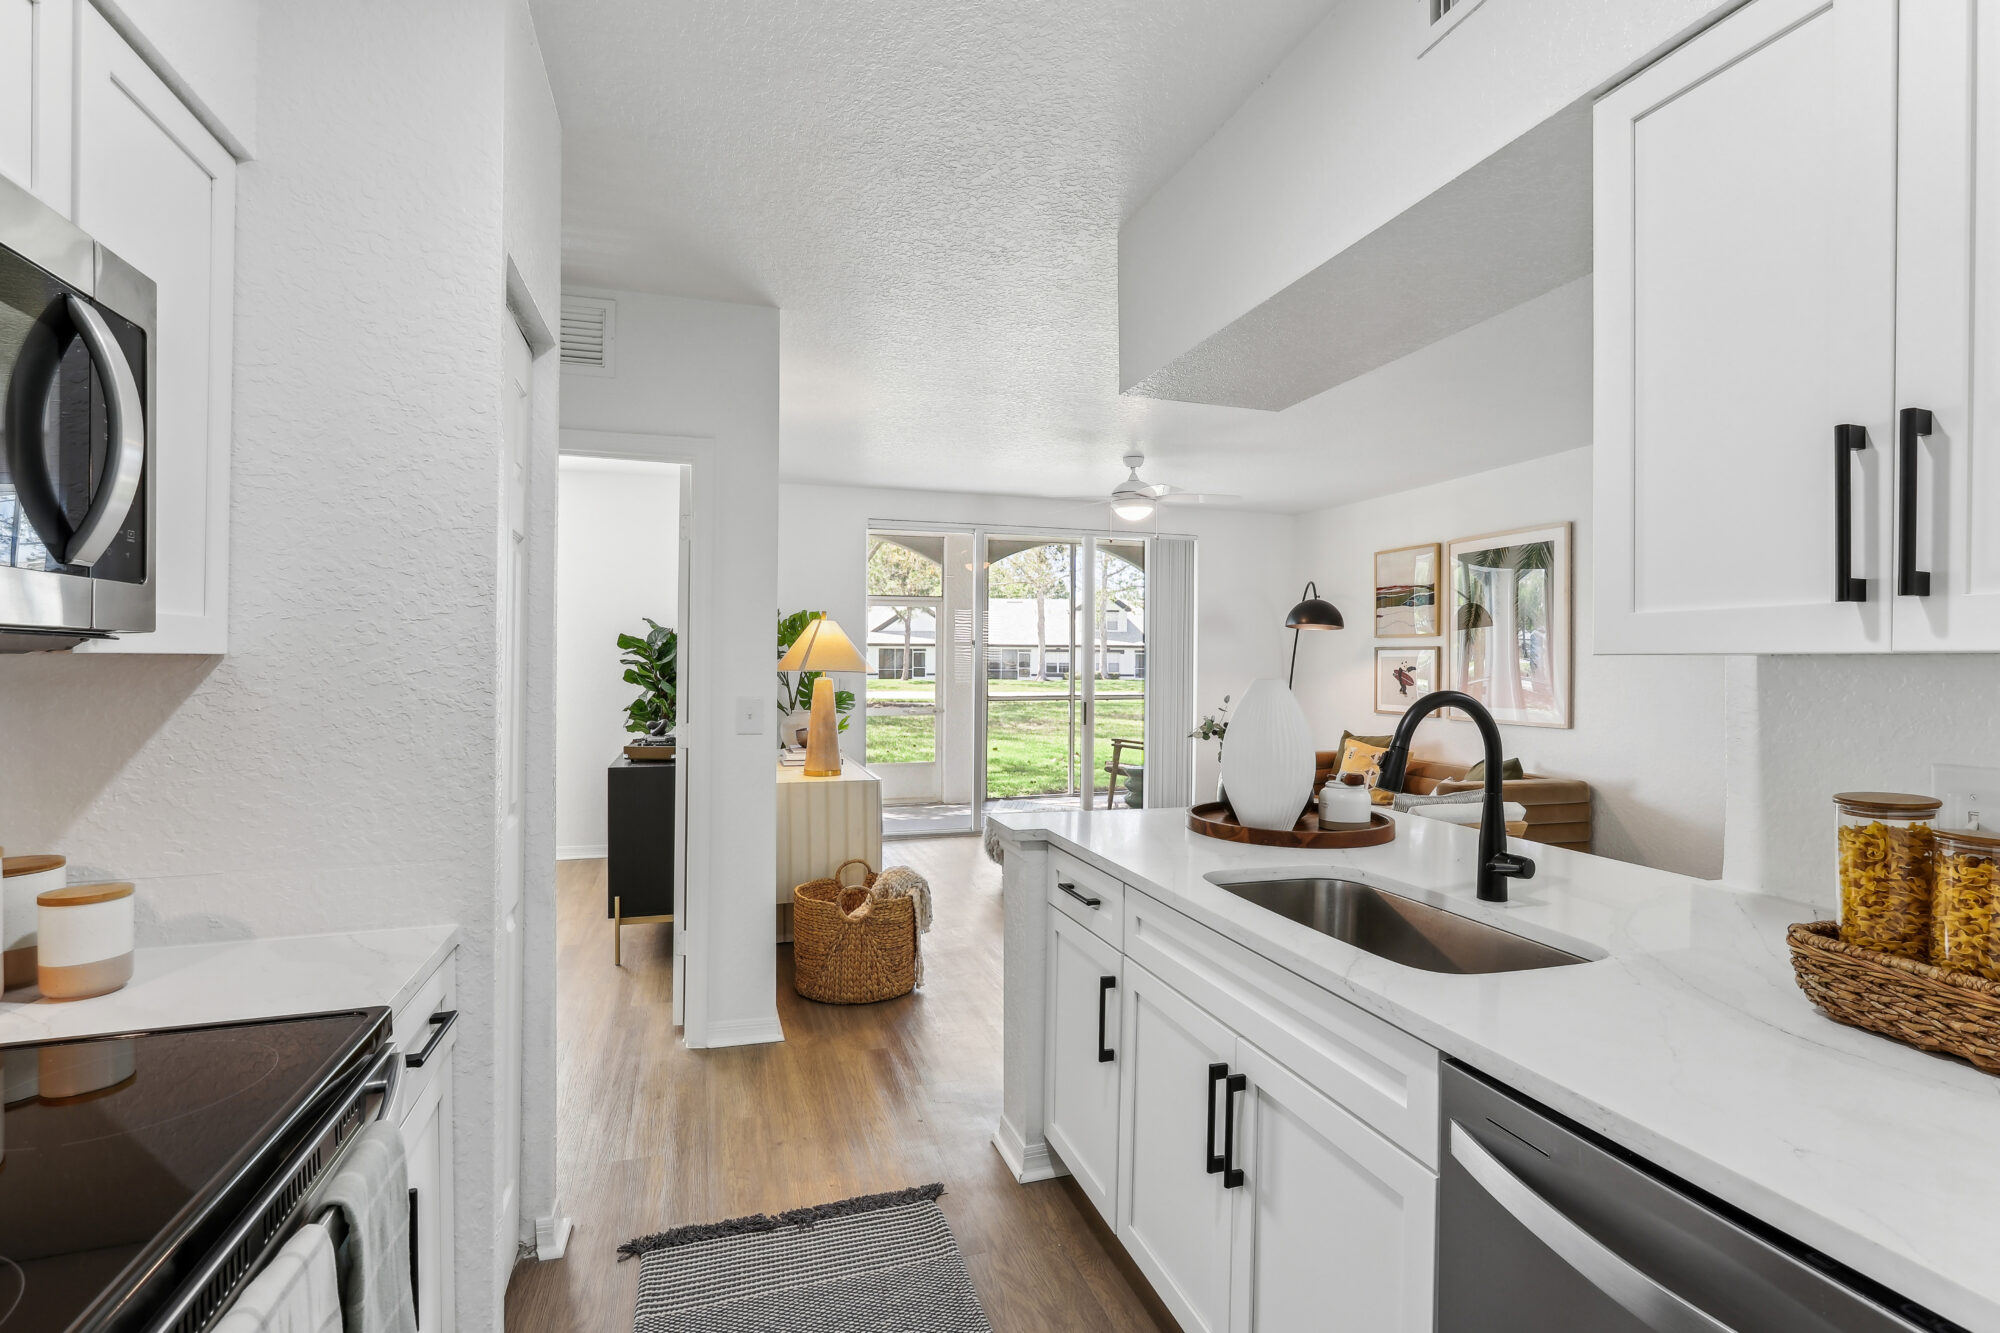 Kitchen with island sink, appliances, wood-style flooring, designer lighting, and open access to living room